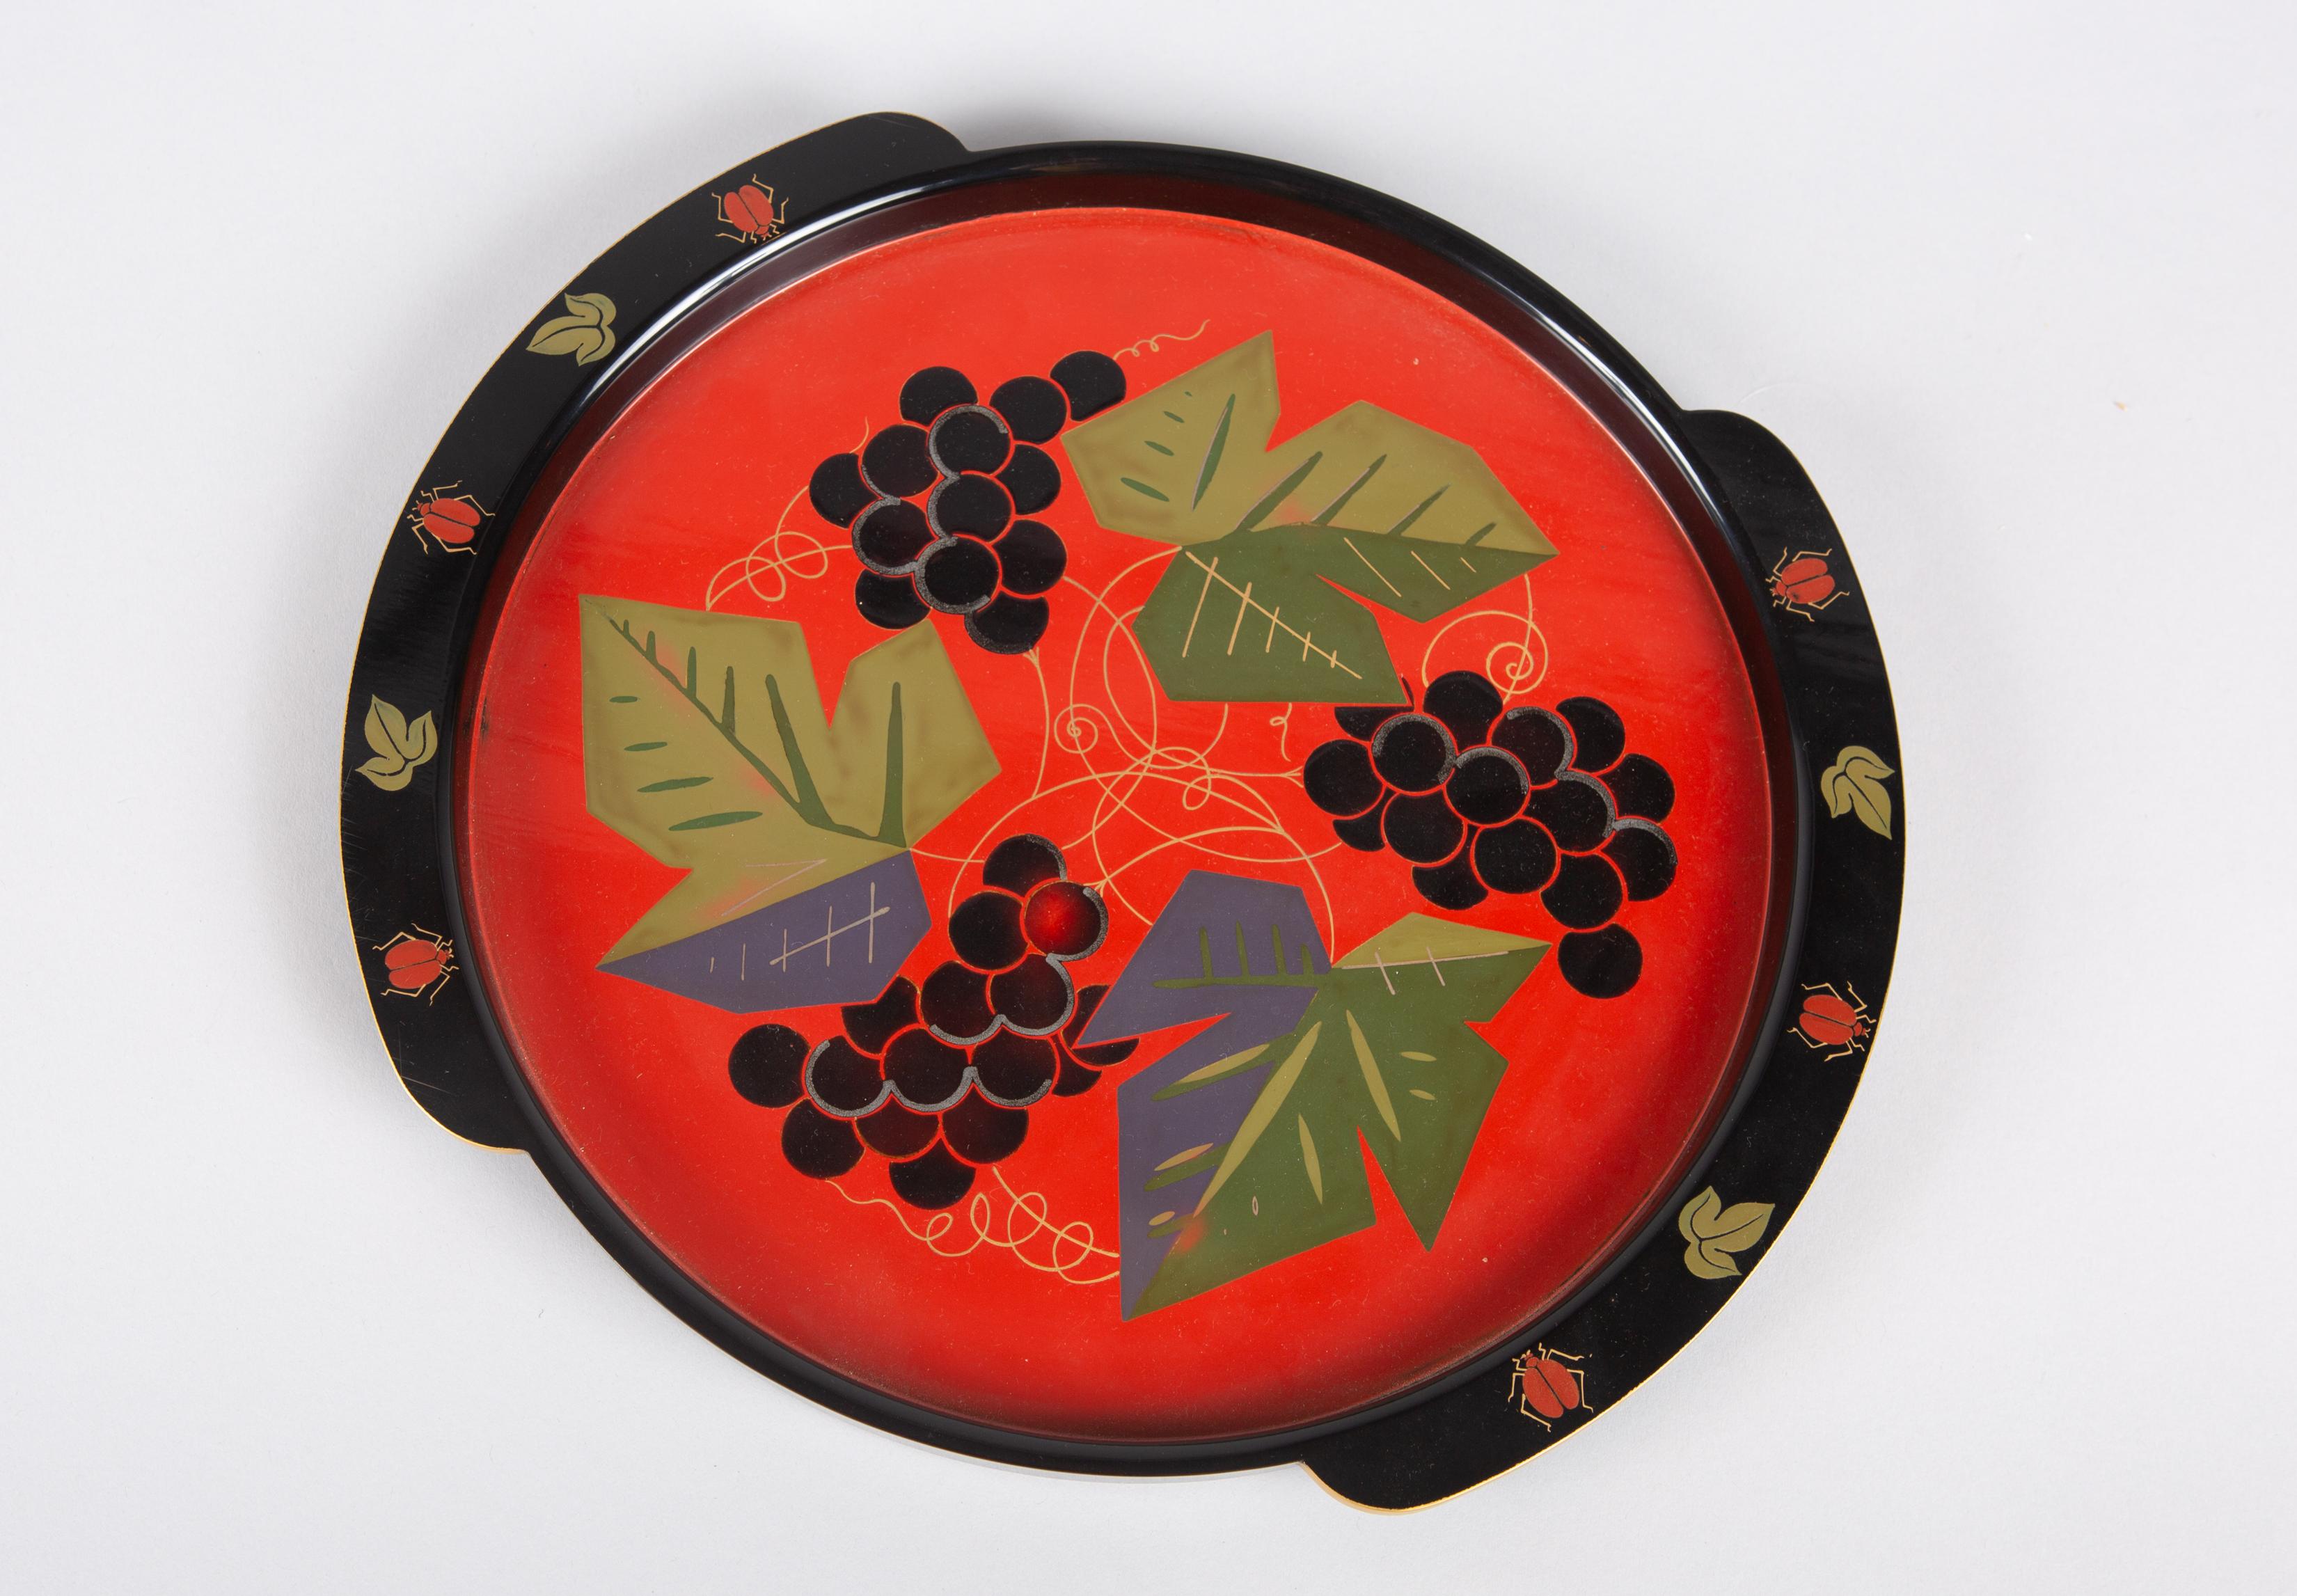 Showa period (1926 - 1945) vibrant lacquer work with grape bunches in the center on a red background, and two handles with leaf and beetle details. Signature on the reverse reads: Masa Nari. Comes with storage box.